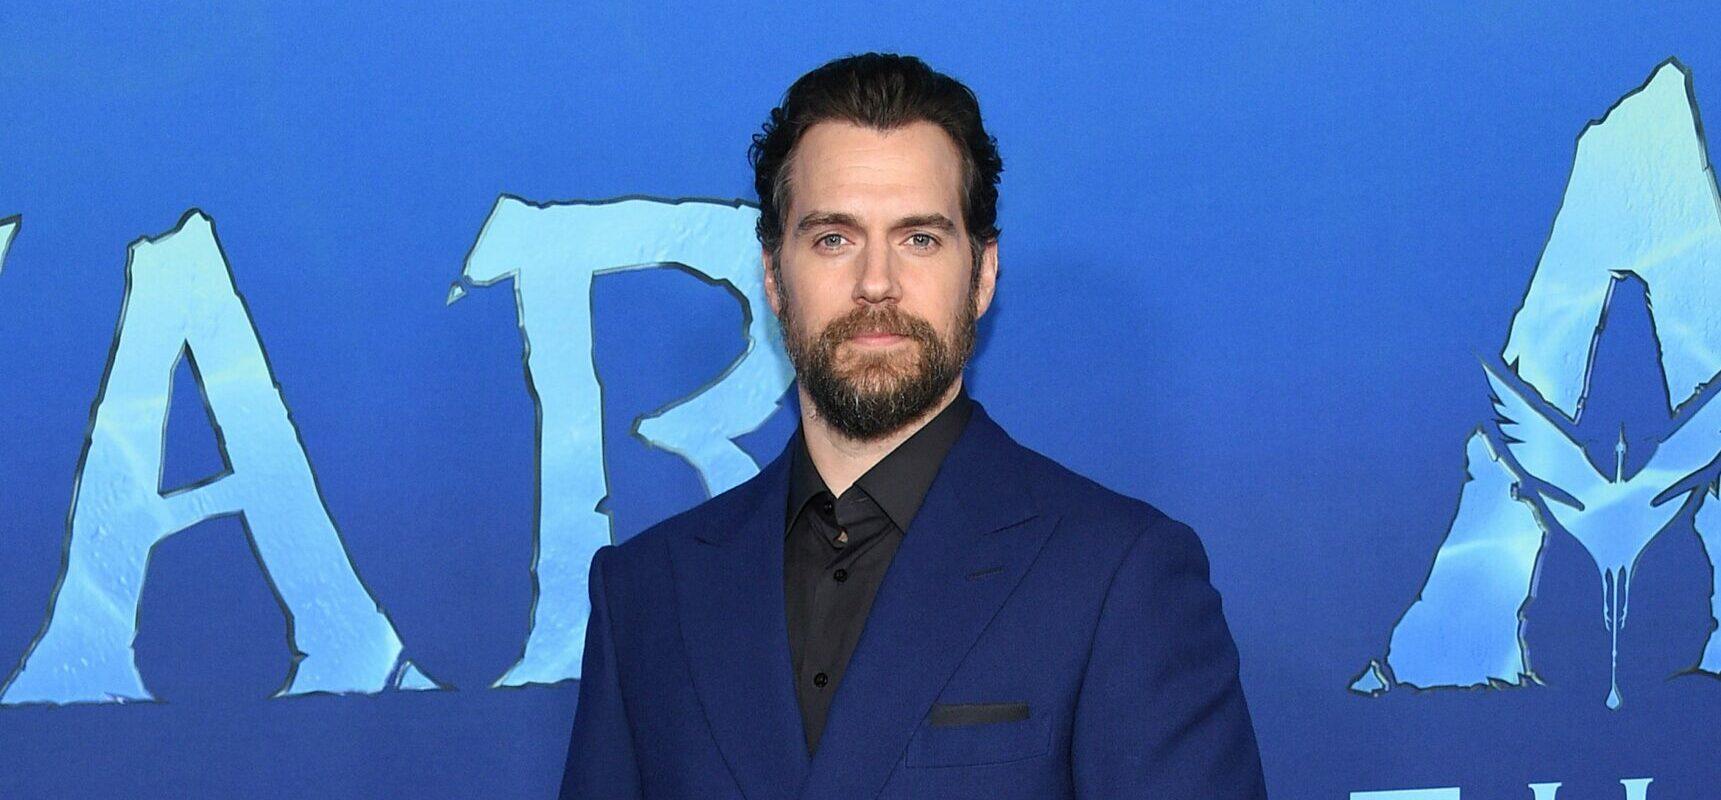 Henry Cavill Slams Intimate Scenes In Films As An ‘Excuse To See People’ Naked